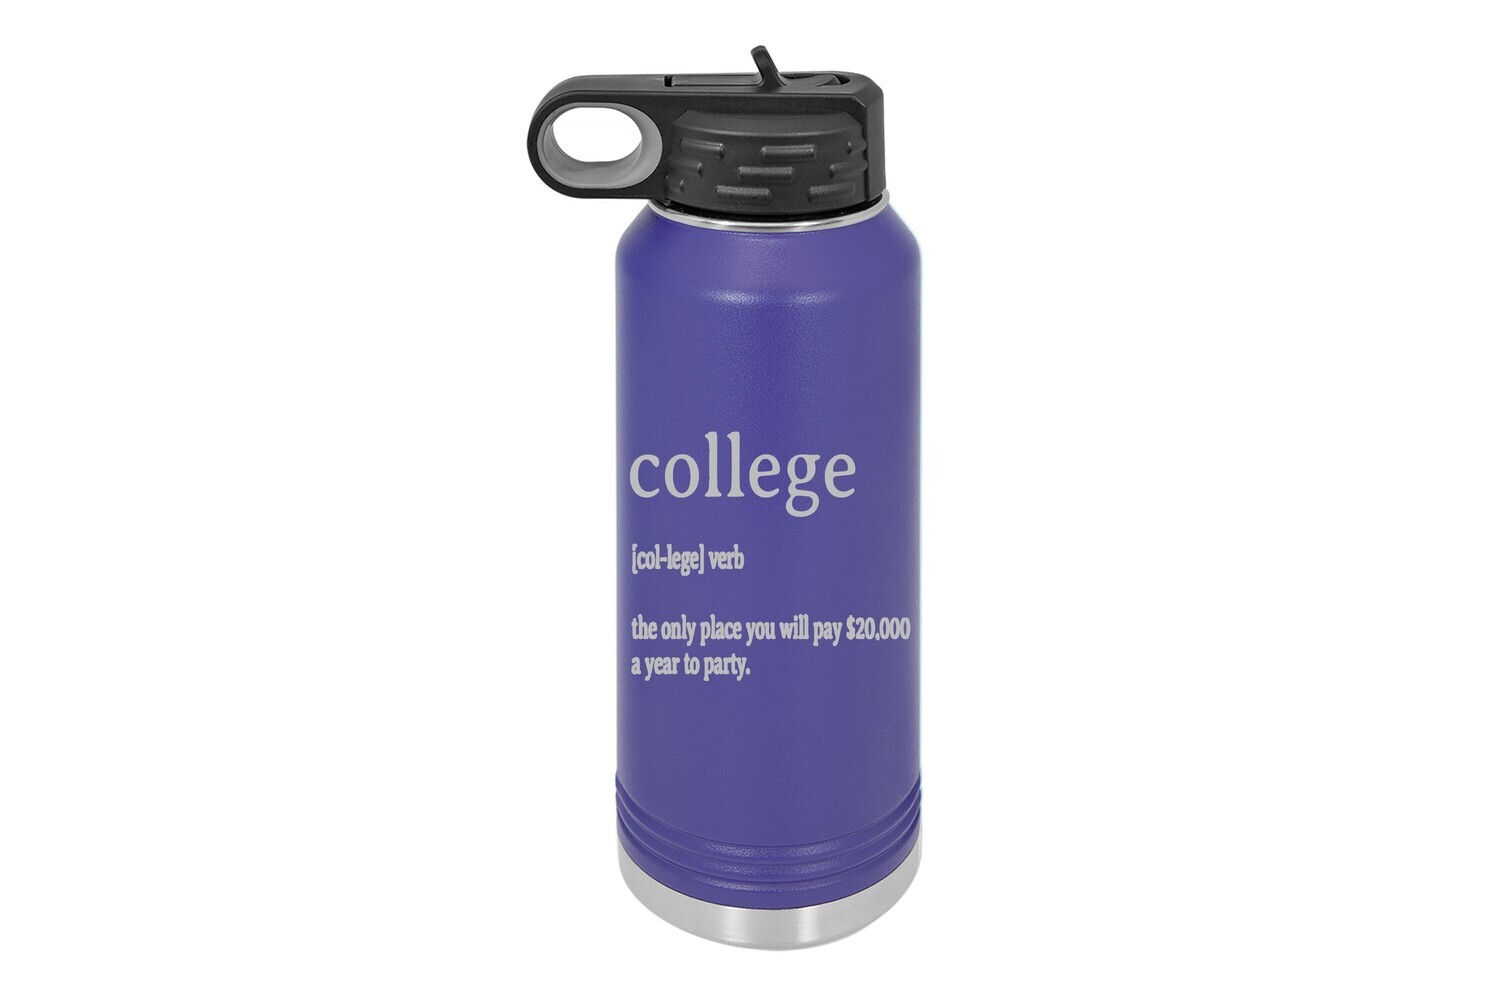 College -verb- the only place you will pay $20,000 a year to party. Insulated Water Bottle 32 oz